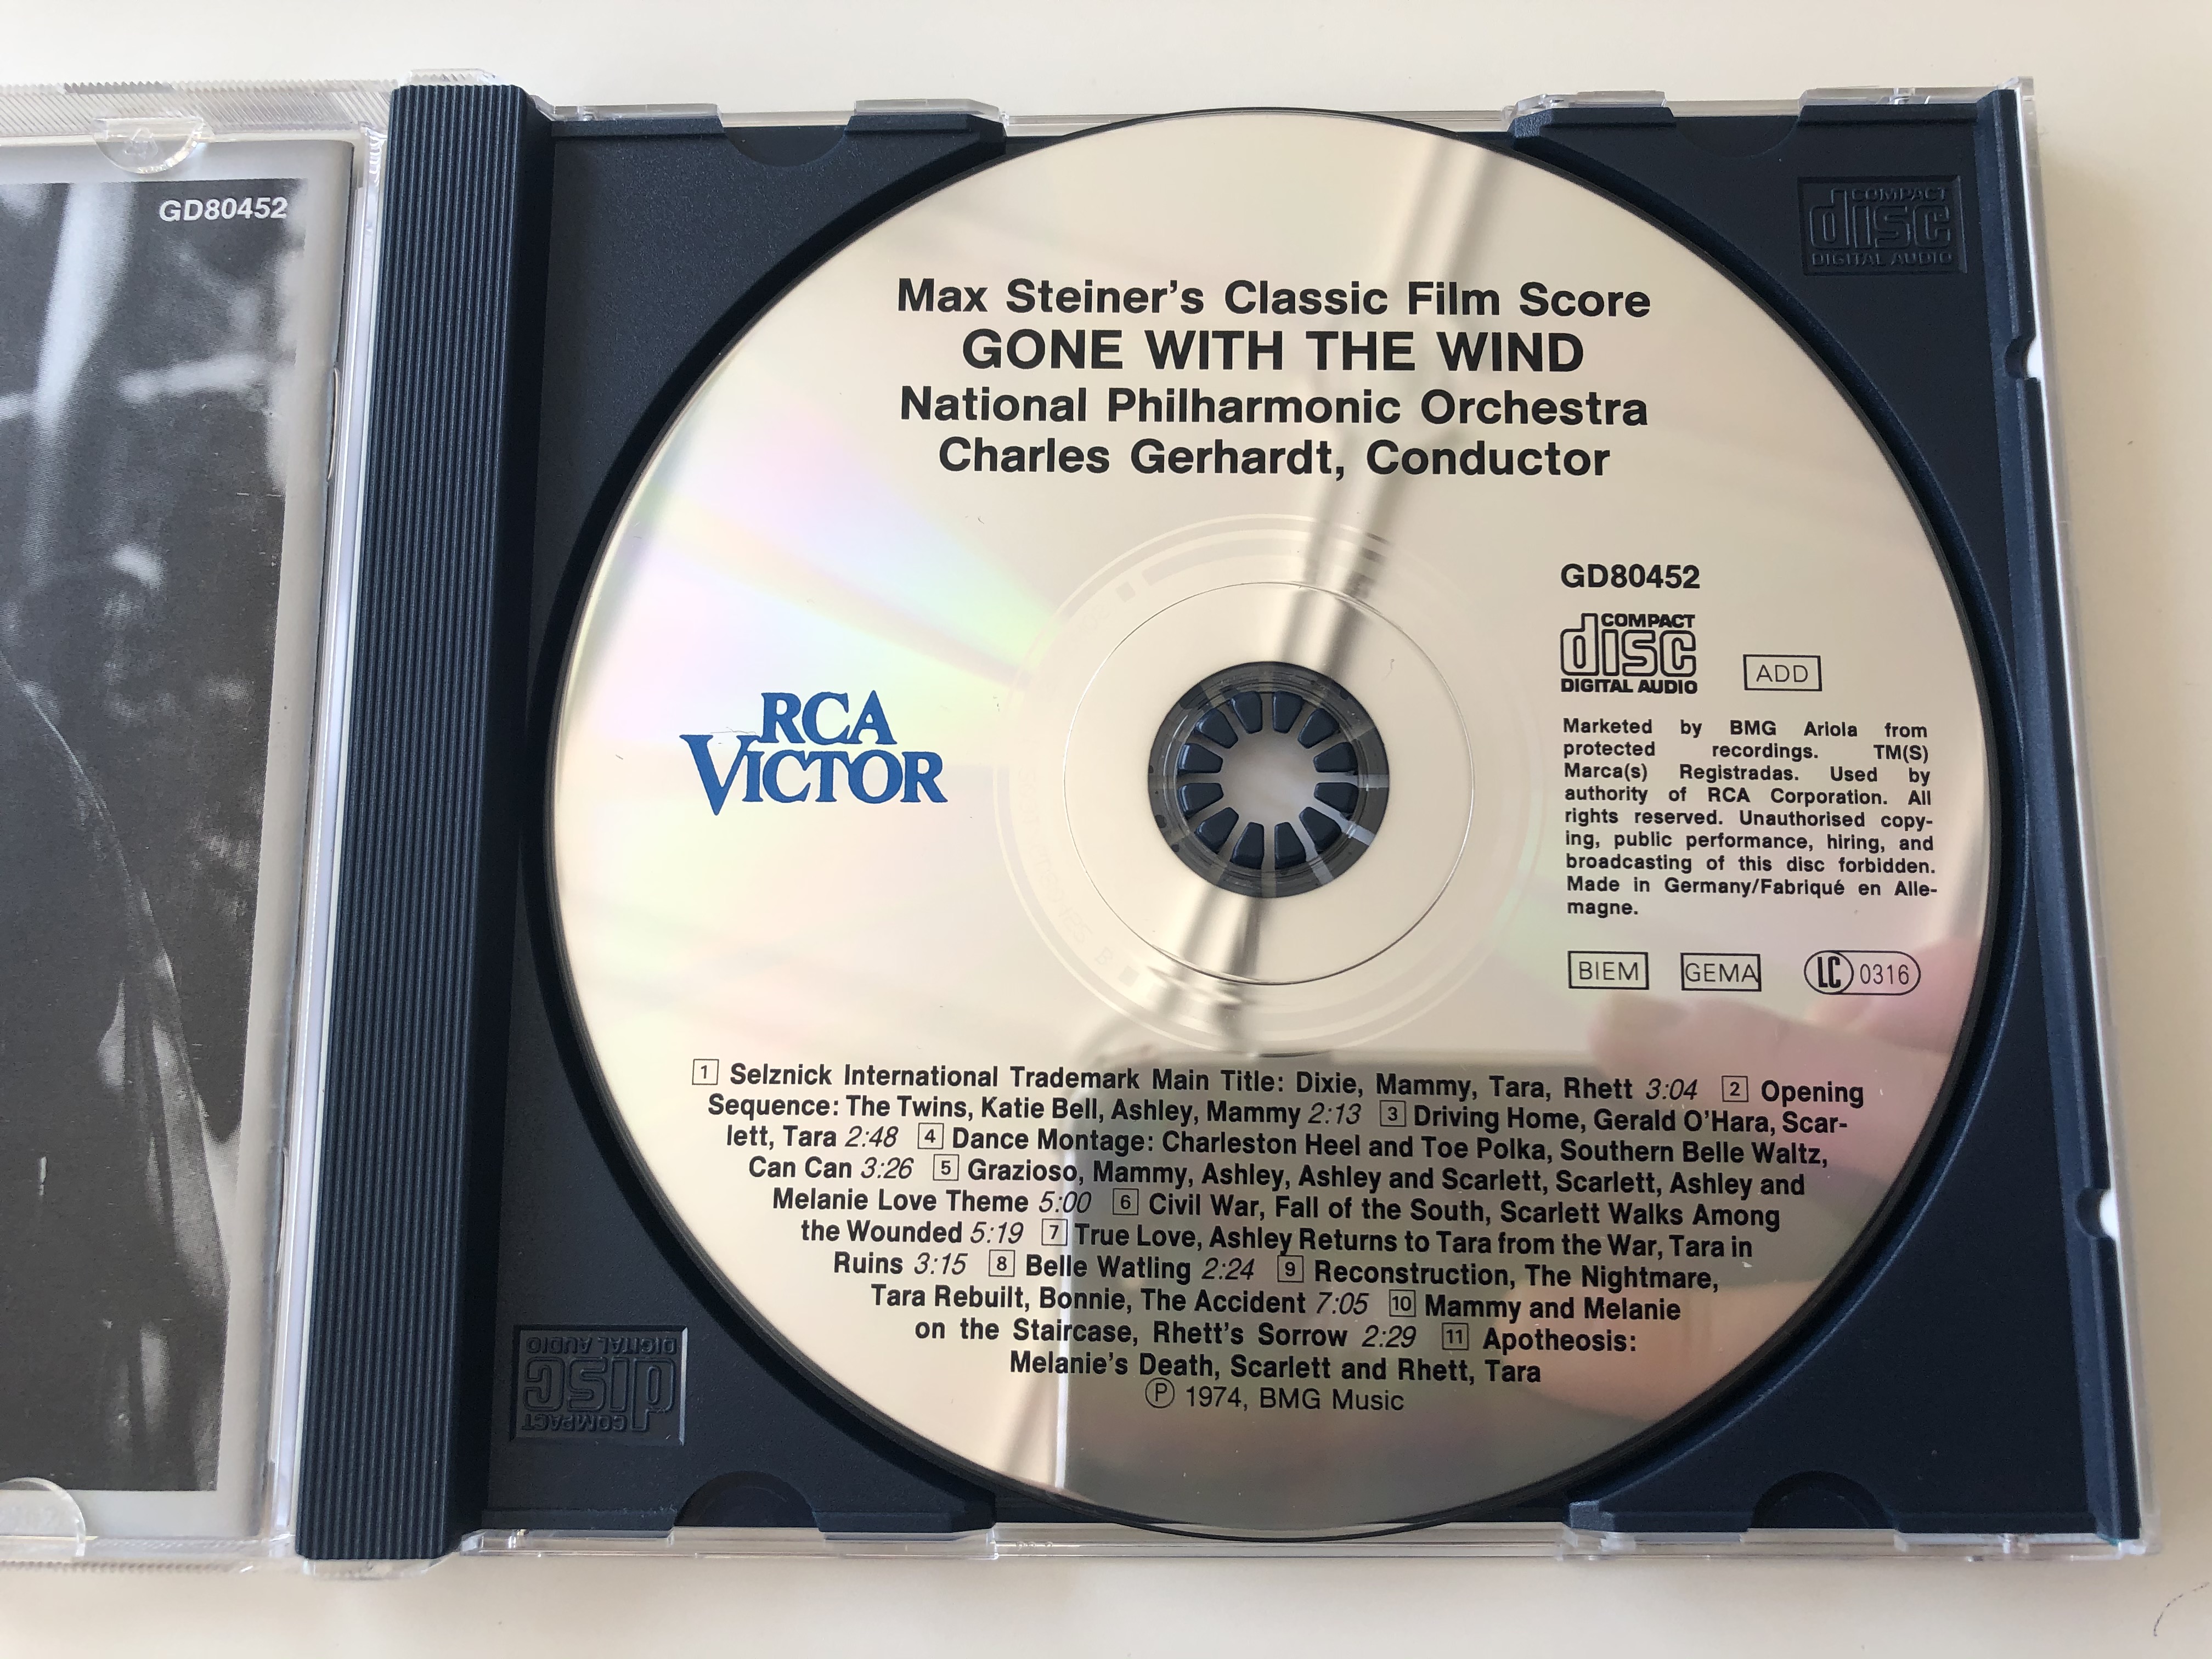 max-stainer-s-classic-film-score-gone-with-the-wind-charles-gerhardt-national-philharmonic-orchestra-bmg-music-audio-cd-1974-gd80452-9-.jpg